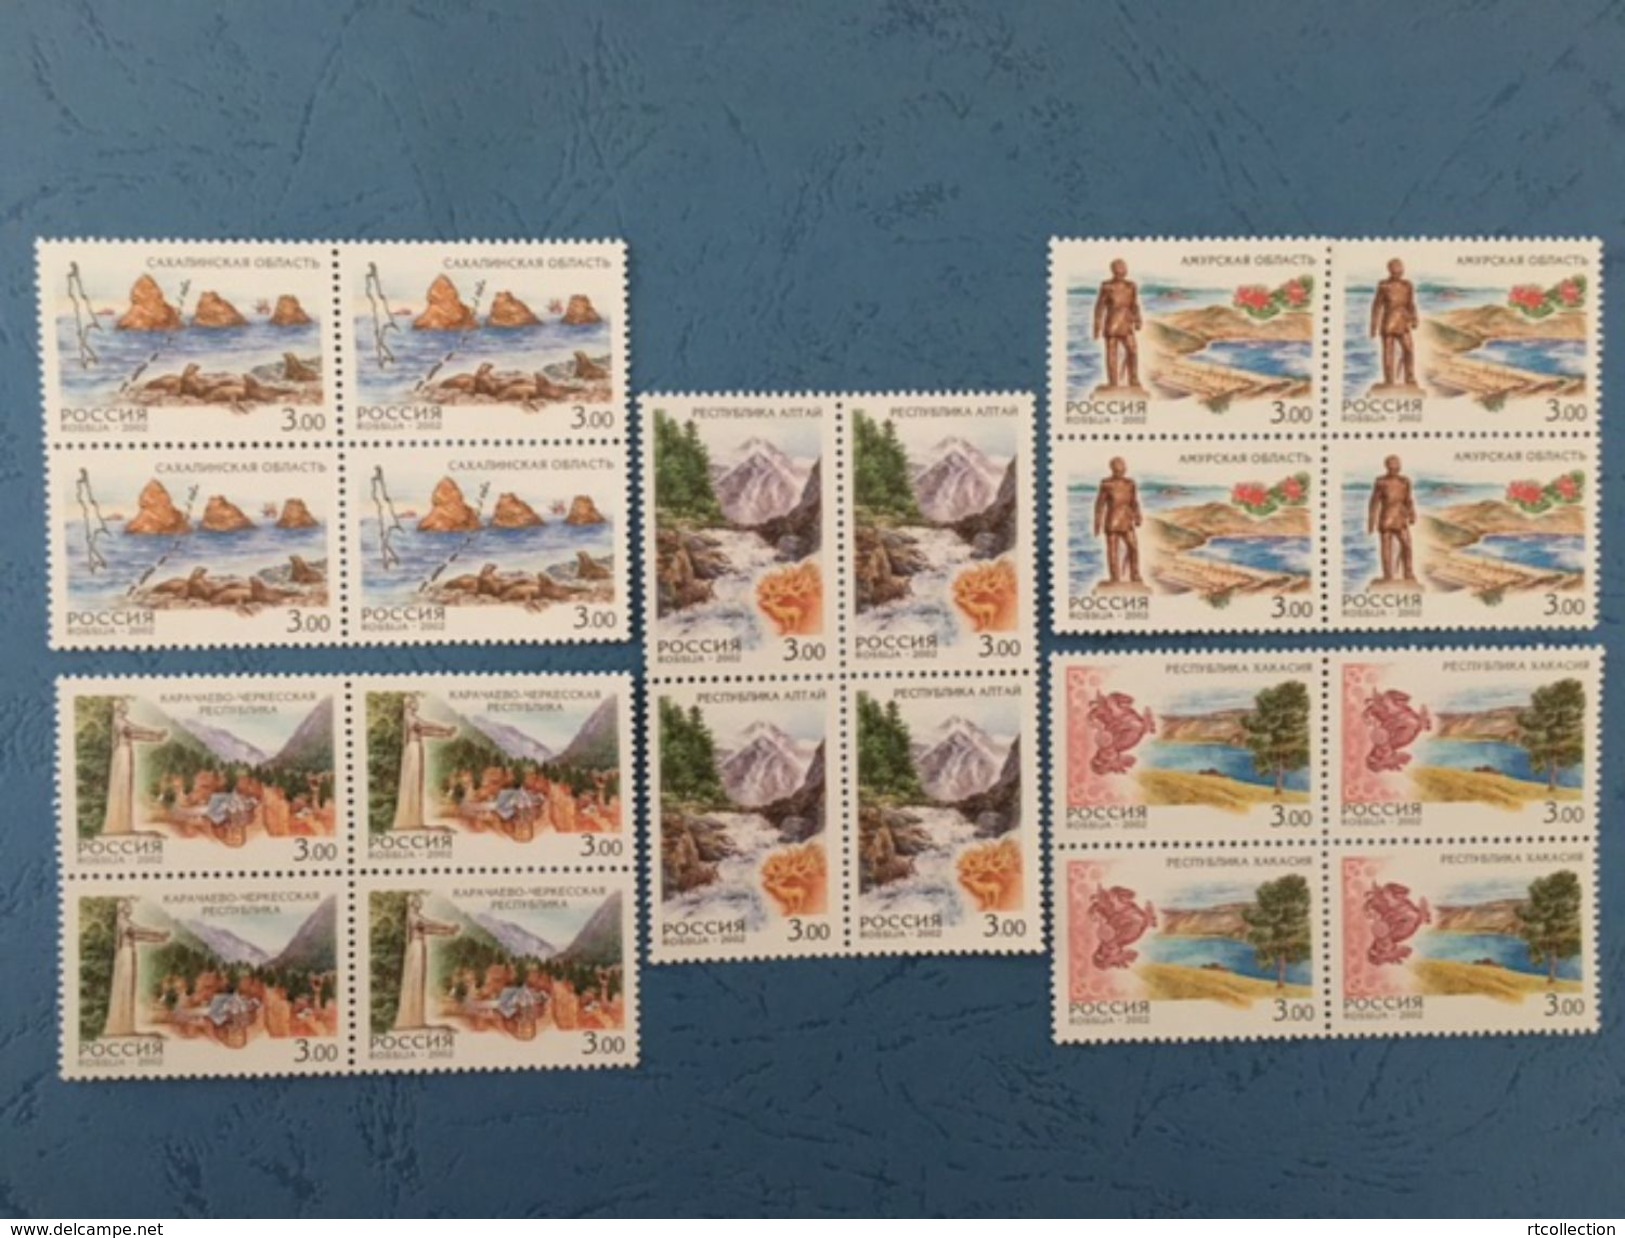 Russia 2002 Block Russian Regions Landscape Geography Places Architecture Art Monuments Nature Stamps MNH Michel 951-955 - Environment & Climate Protection